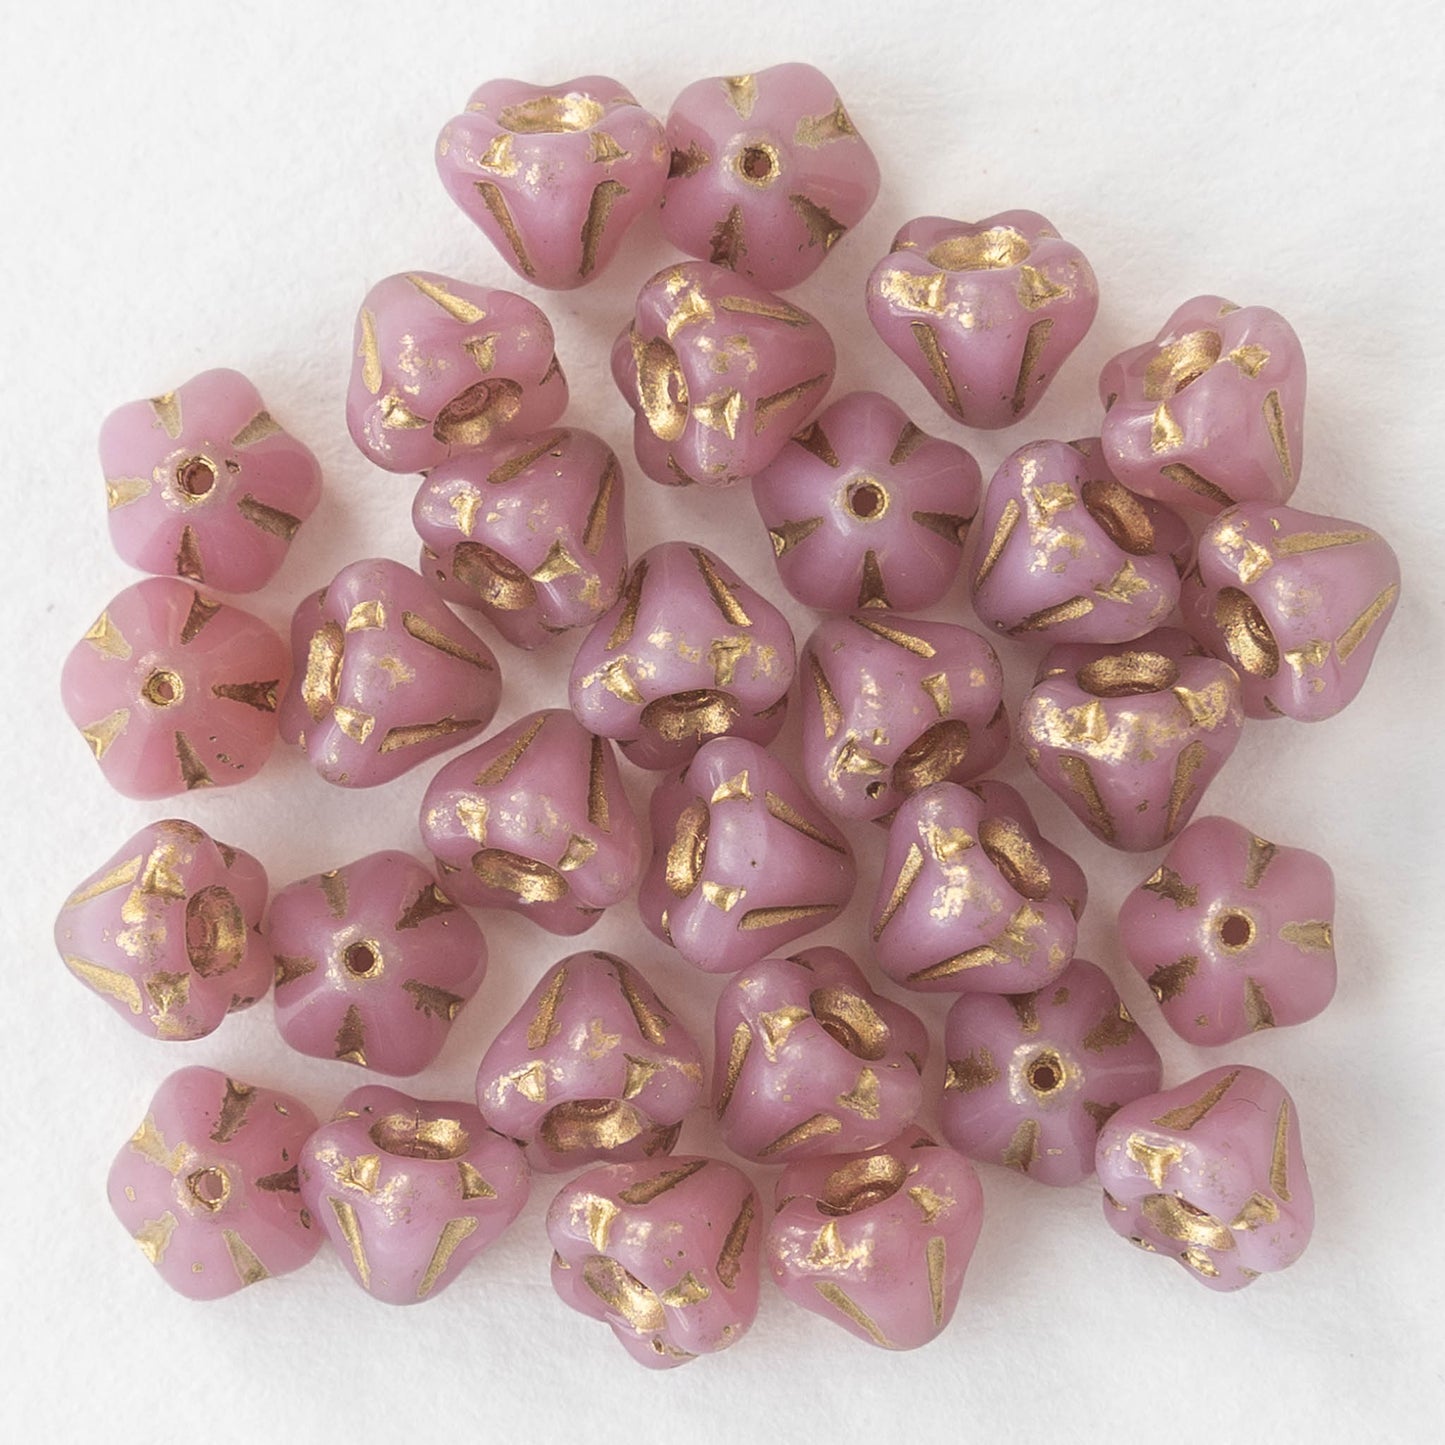 4x6mm Bell Flower Beads -  Pink with Gold Wash- 30 Beads